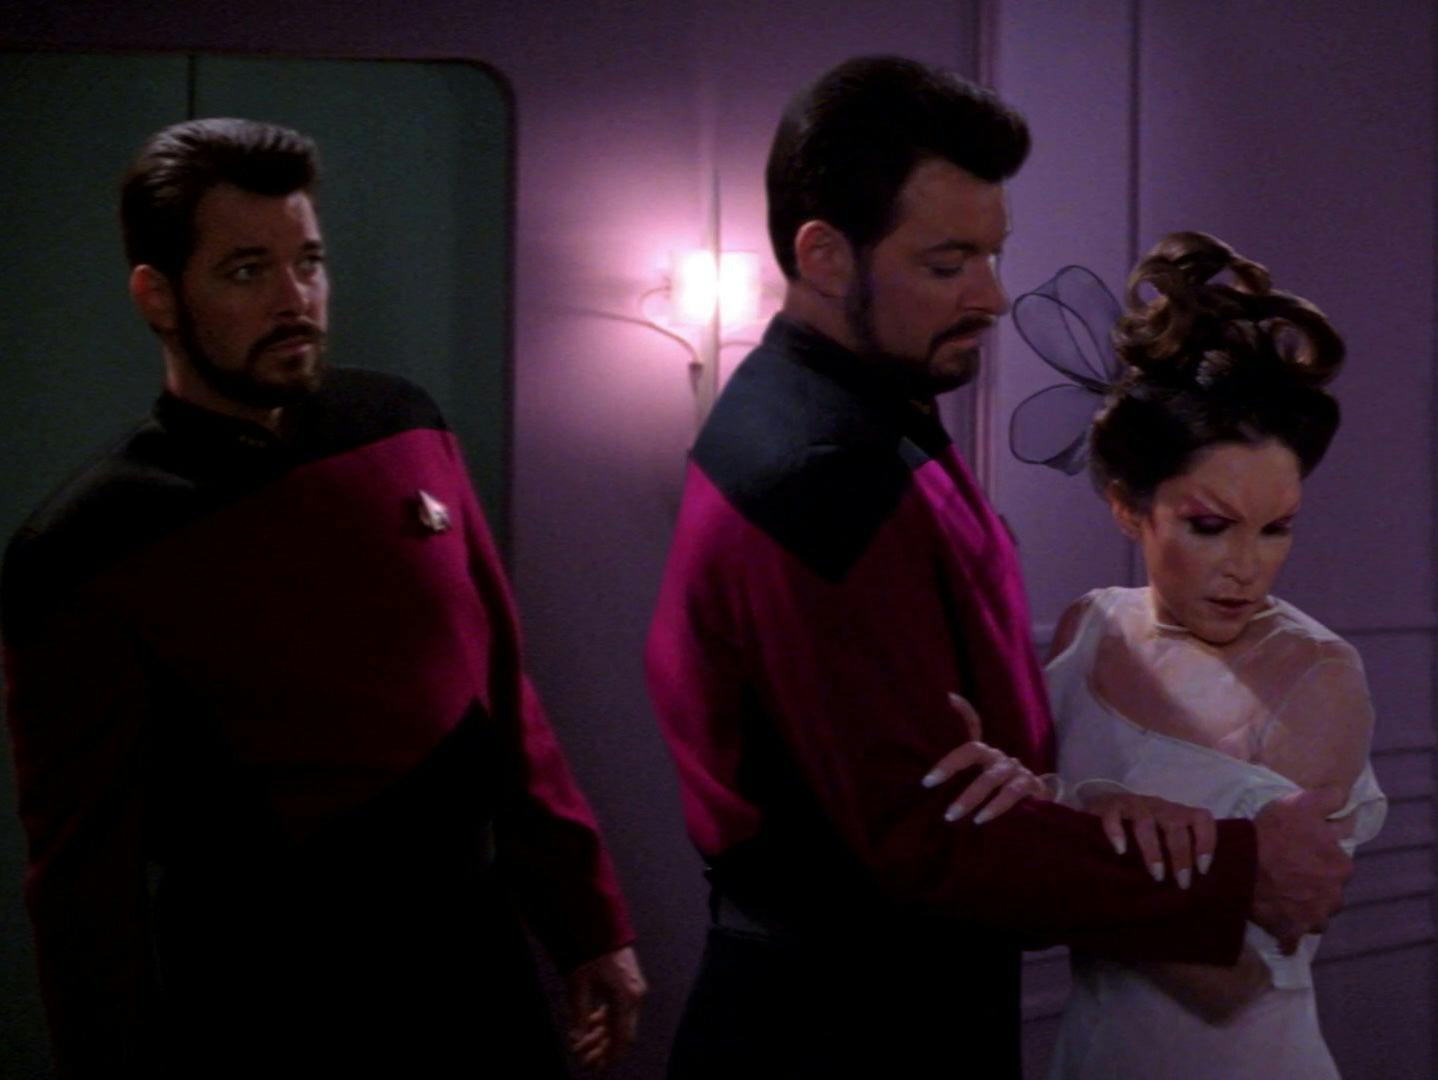 Riker watches a visual interpretation of a crime he's accused of committing on Star Trek: The Next Generation